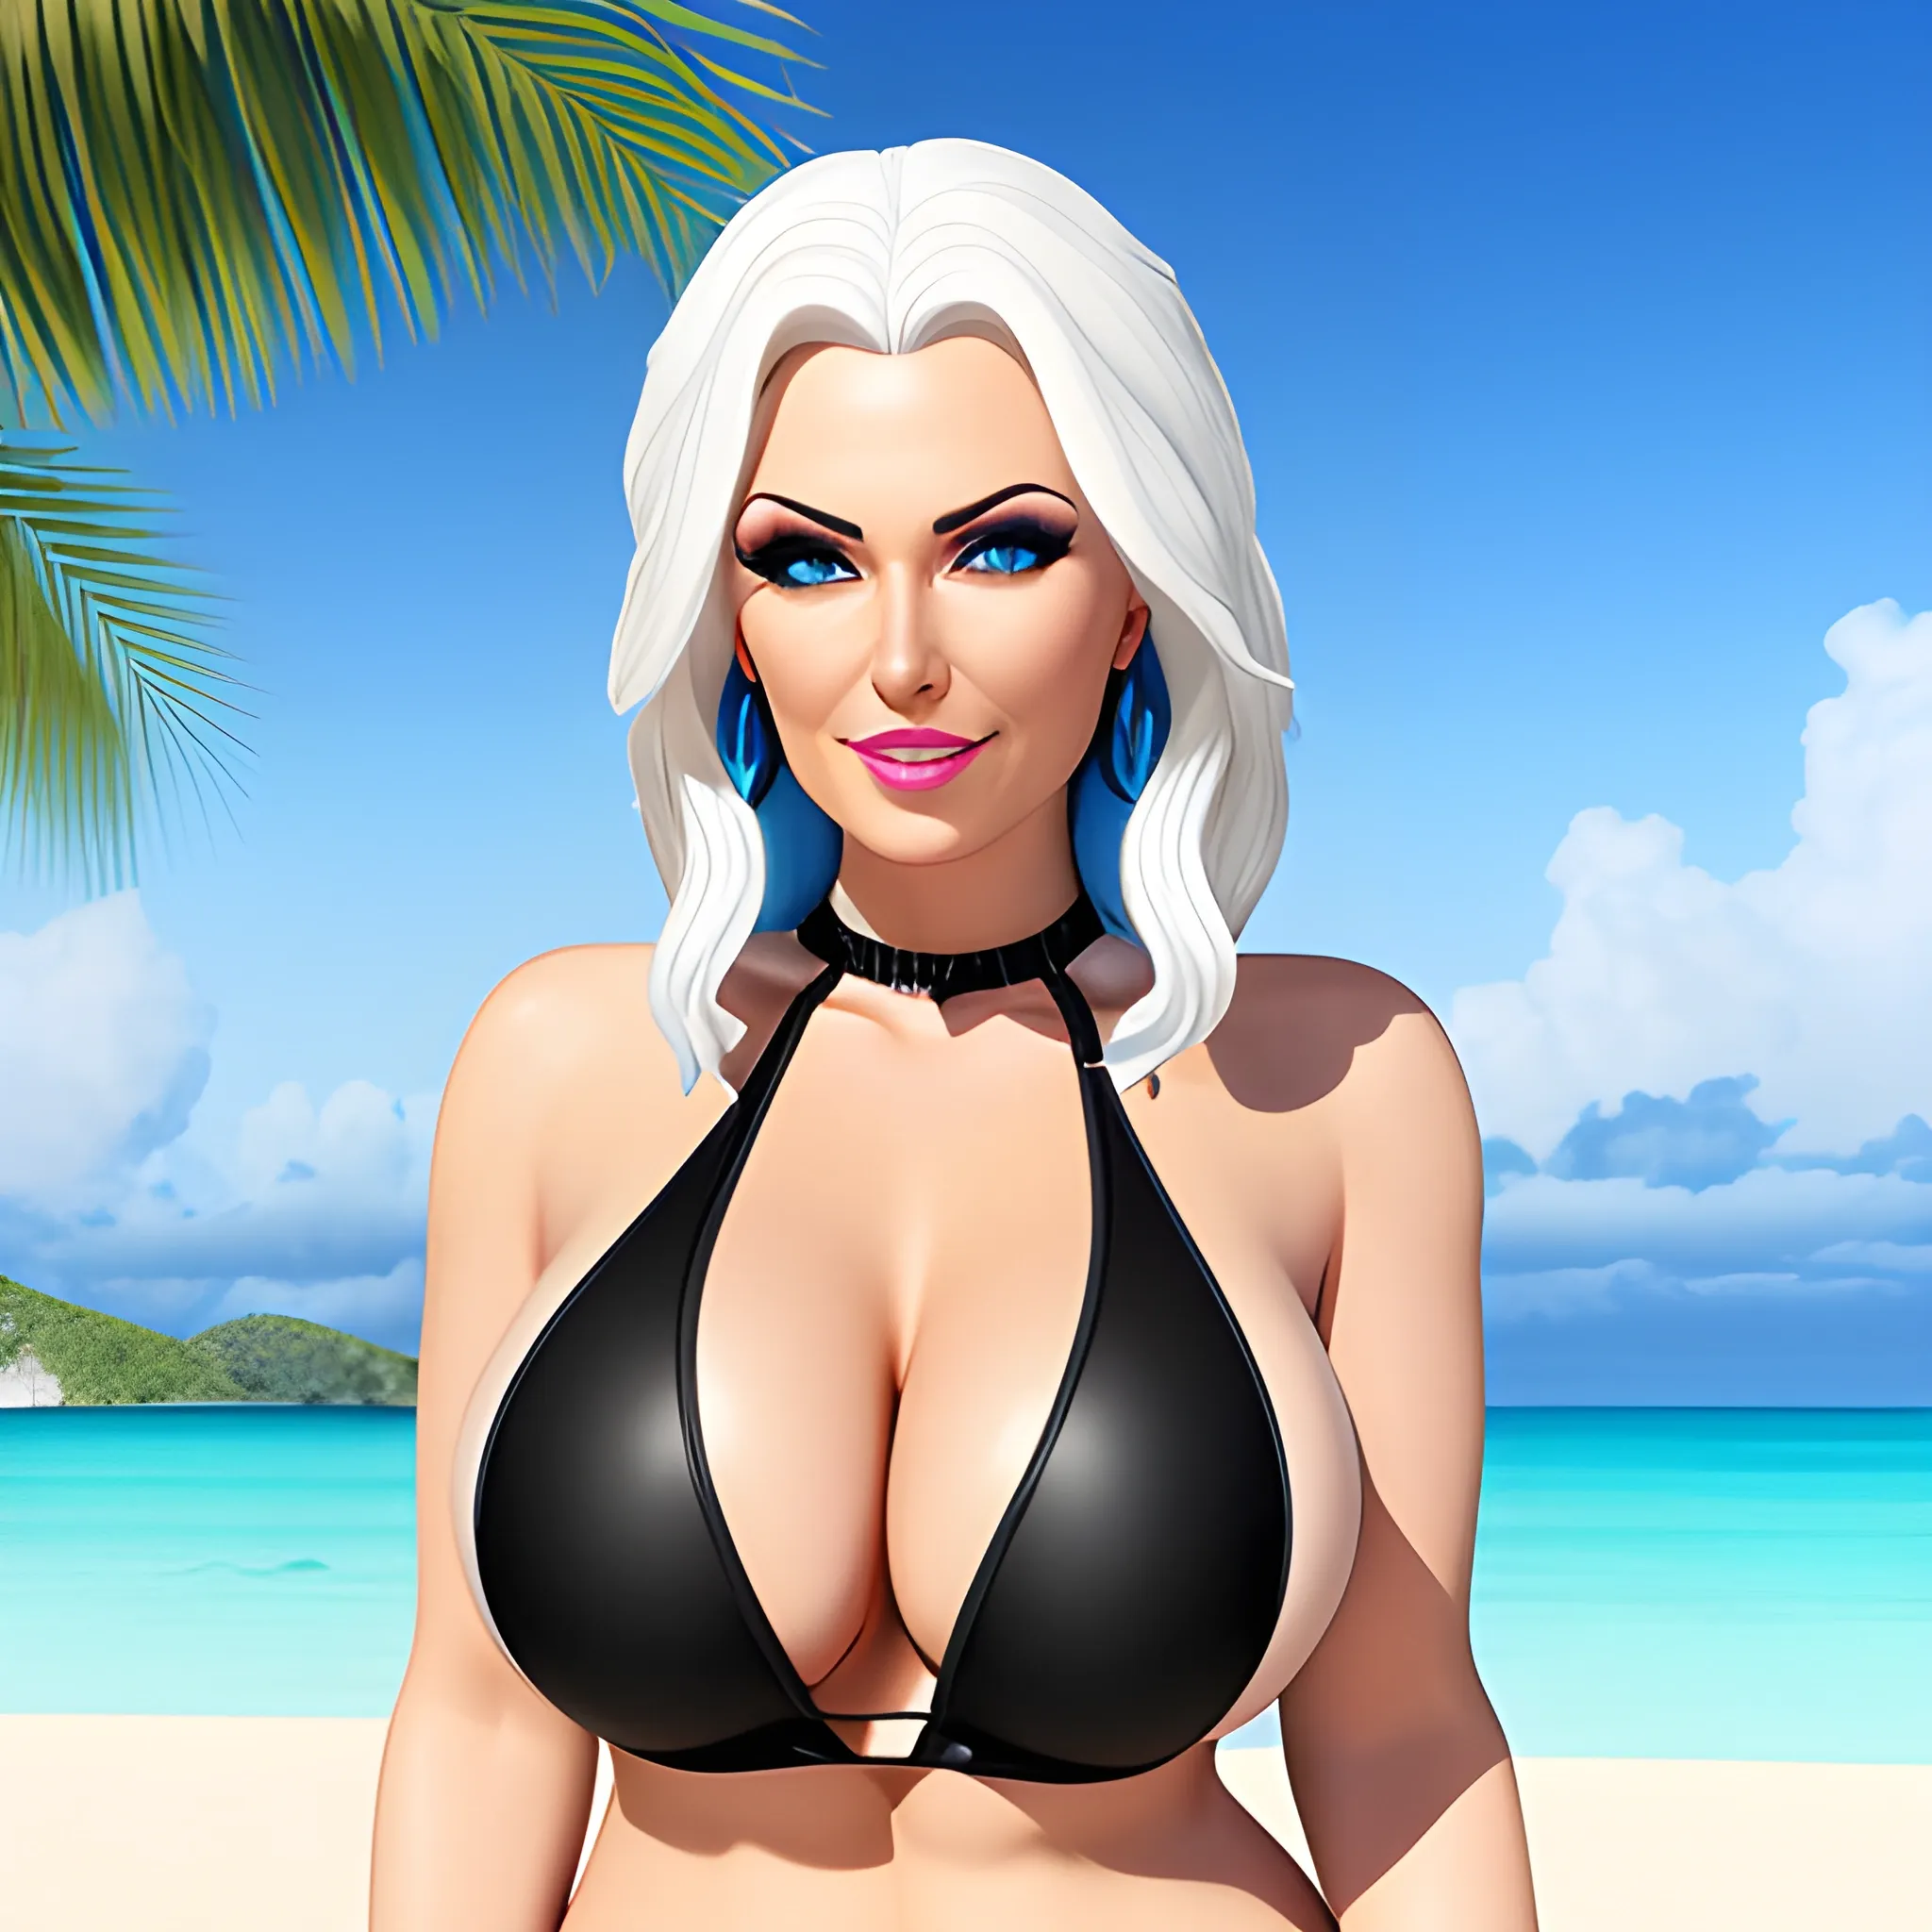 create a photorealistic image of a slightly chubby young woman with white hair and blue eyes, she is wearing a black monokini on a tropical beach, chest visible, high details